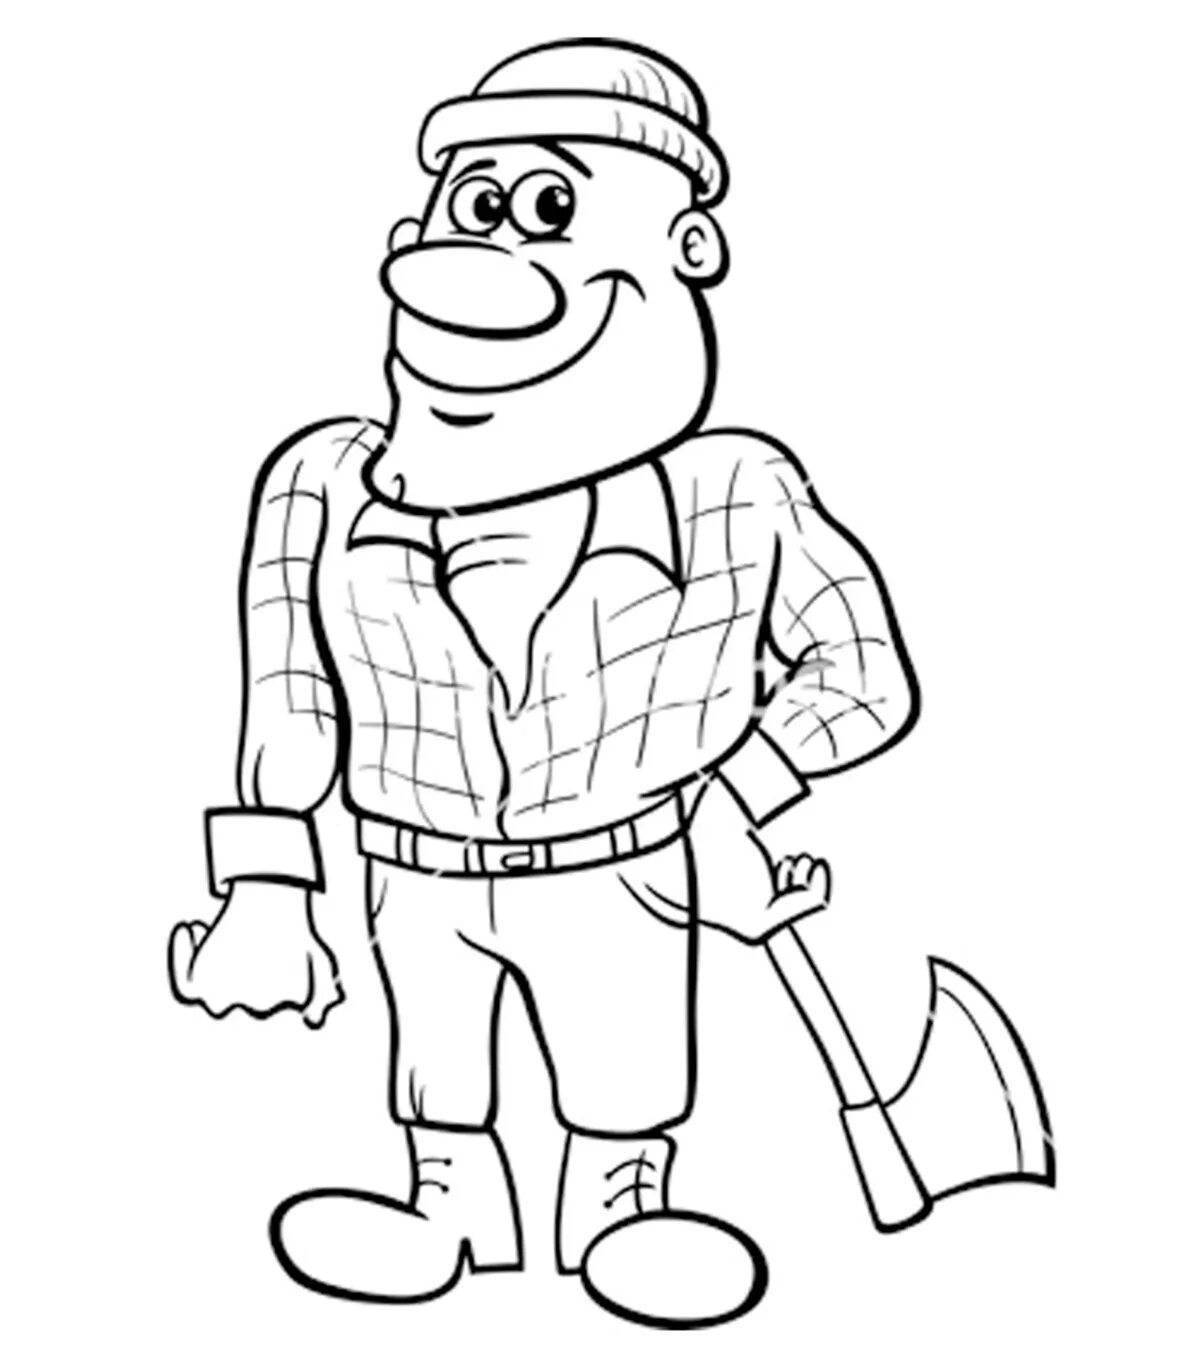 Charming forester coloring page